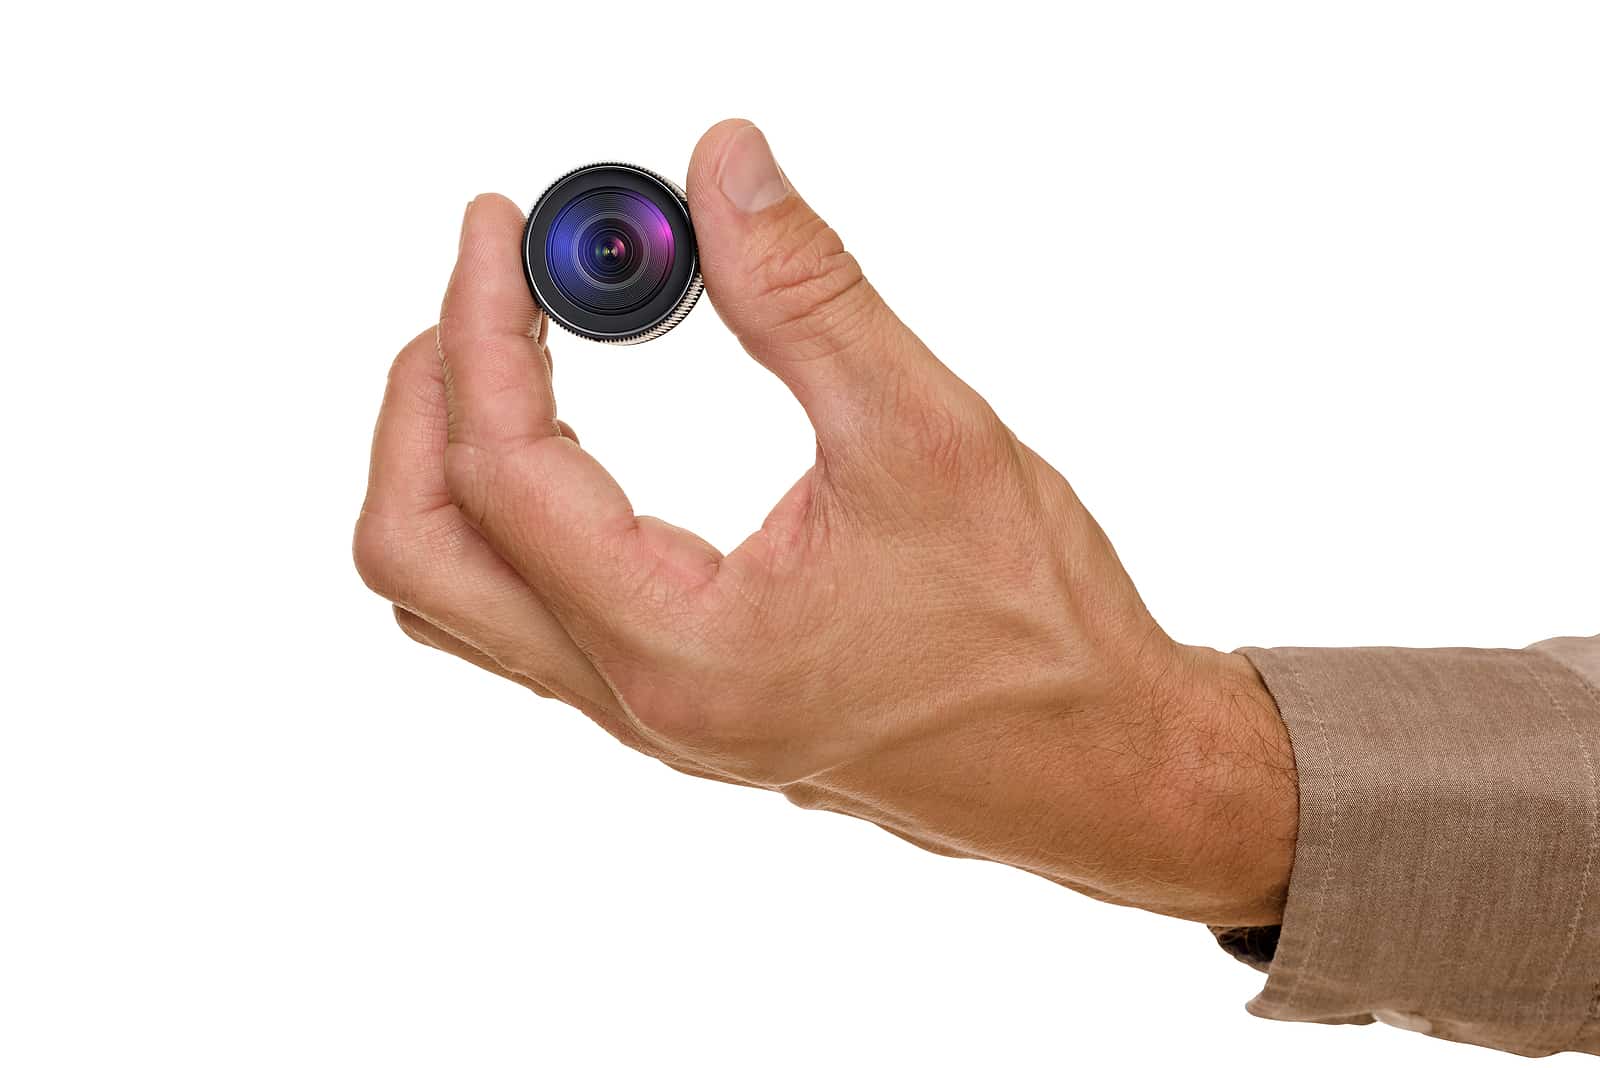 How to detect hidden cameras & listening devices